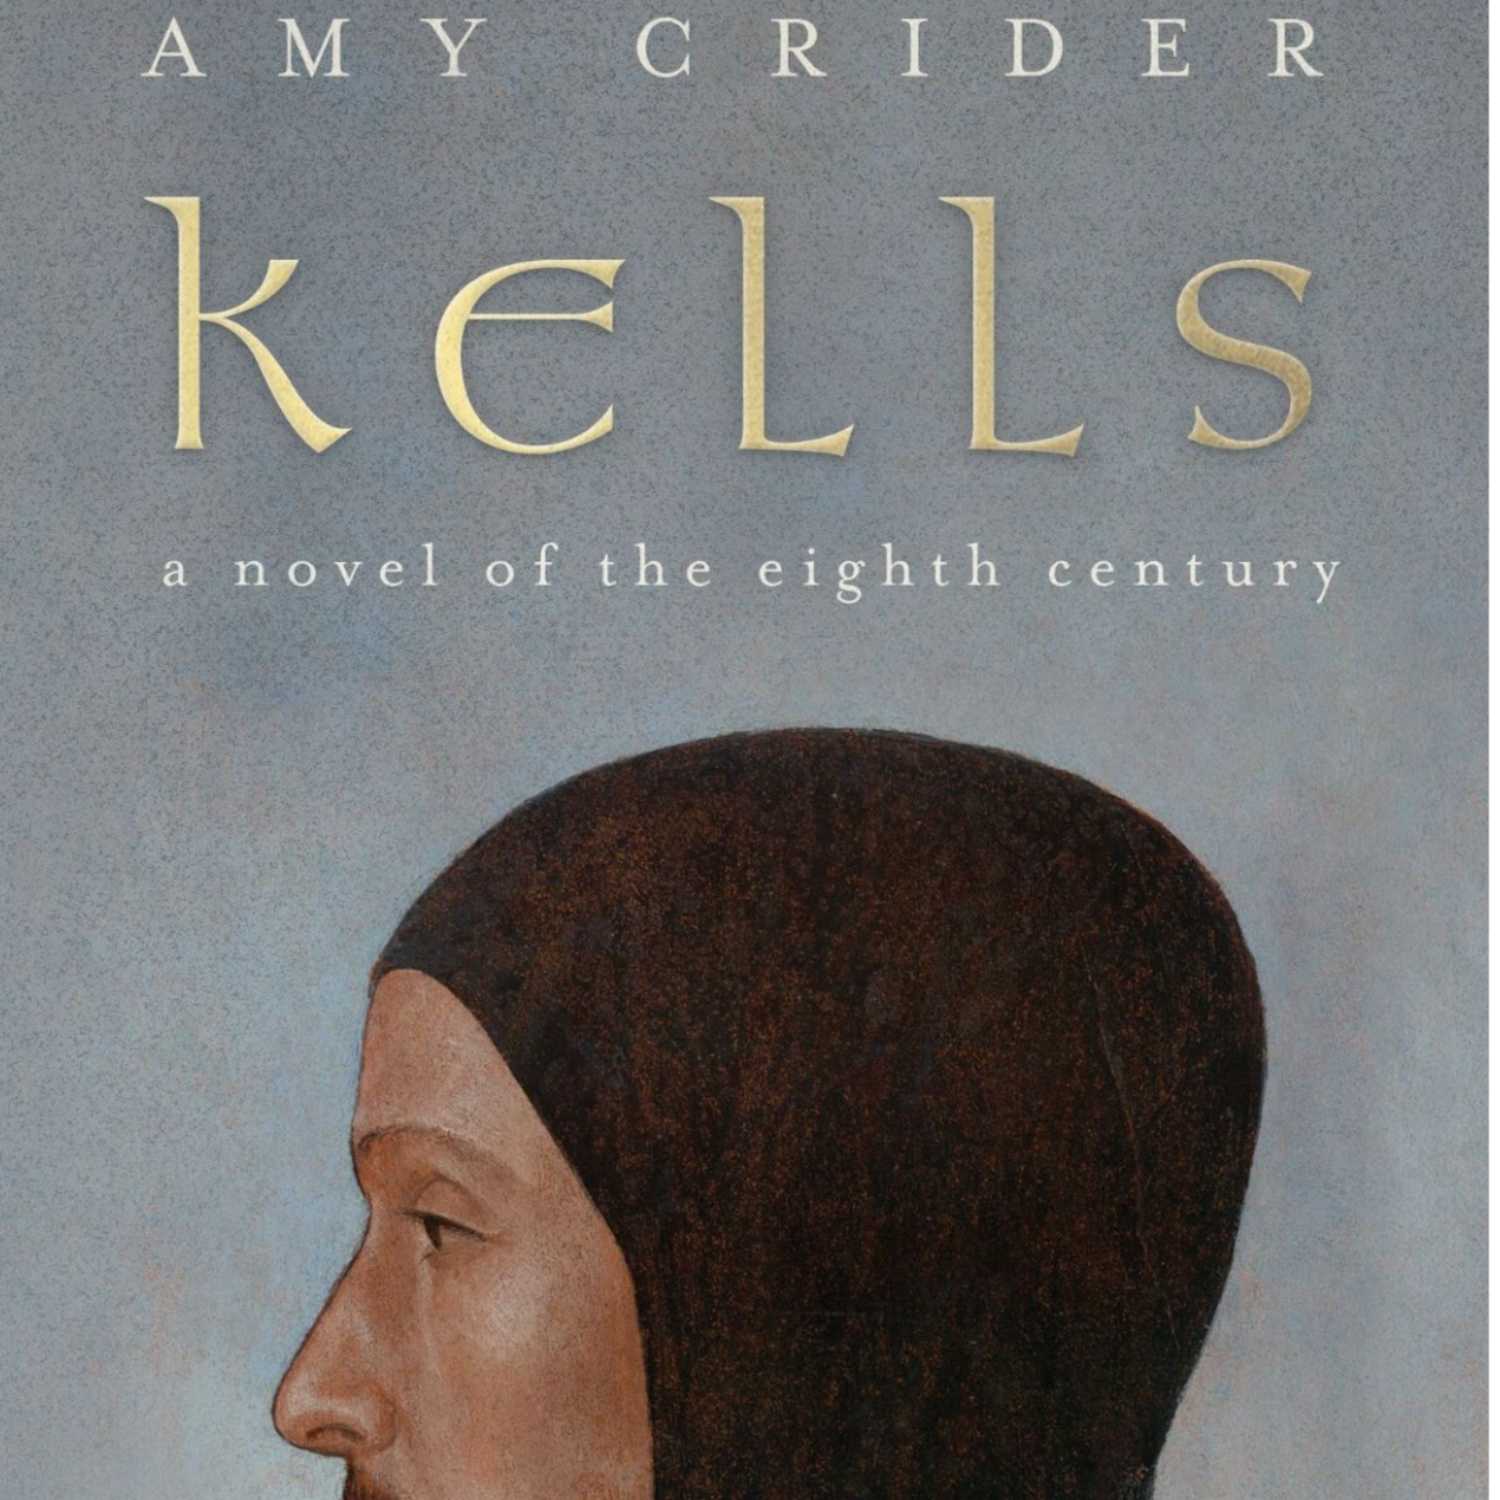 Kells: An Interview with Amy Crider